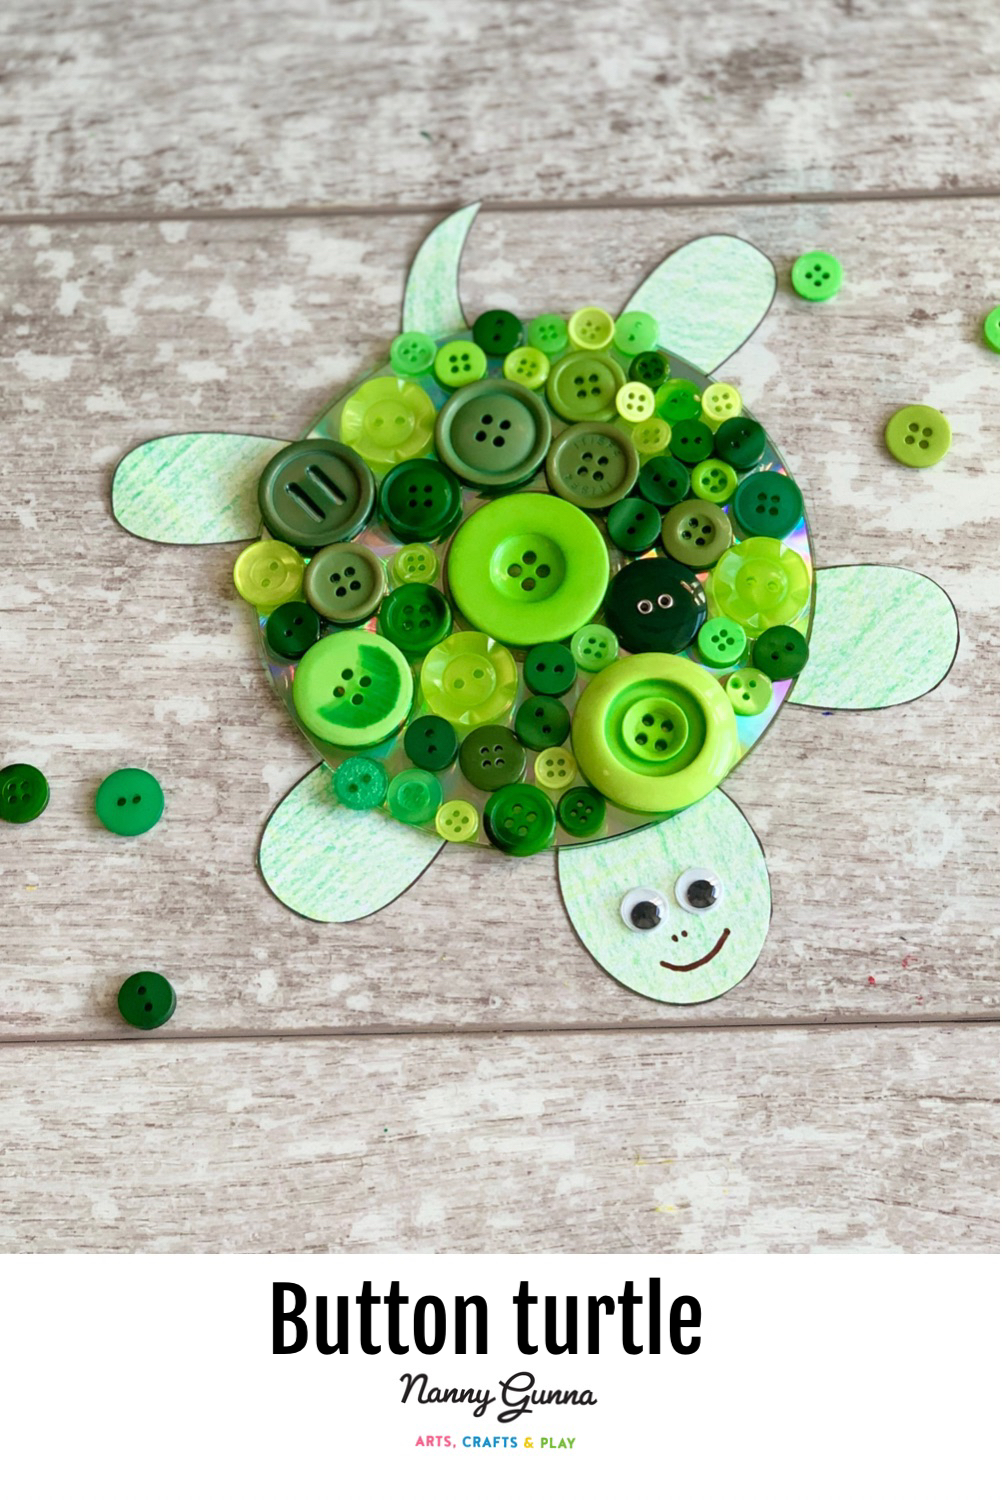 Colorful CD & Button Turtle Craft for Kids